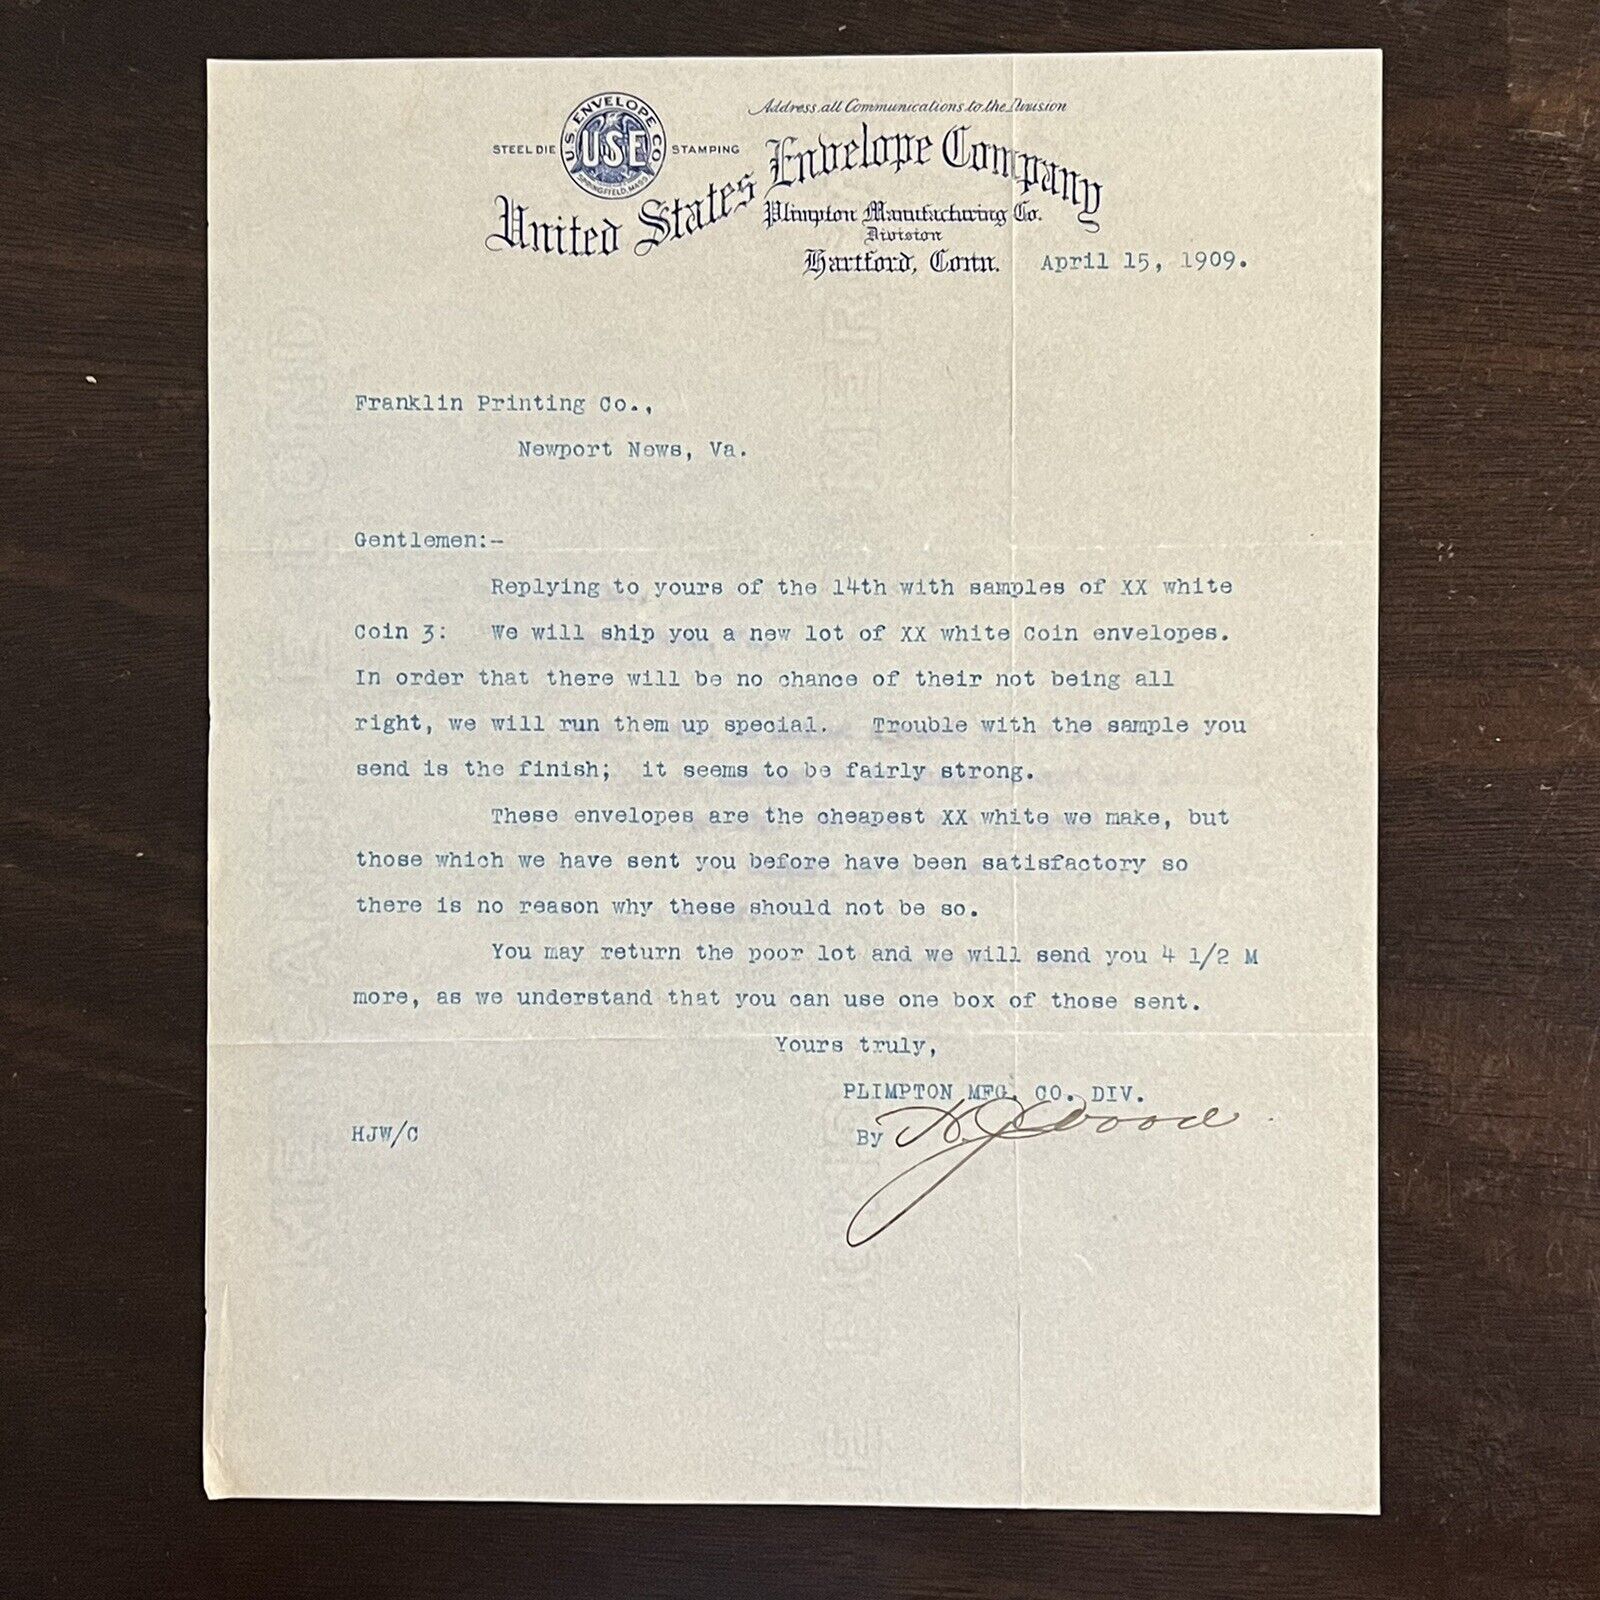 1909 U.S. ENVELOPE COMPANY CONNECTICUT TYPED LETTER STEEL DIE STAMPING